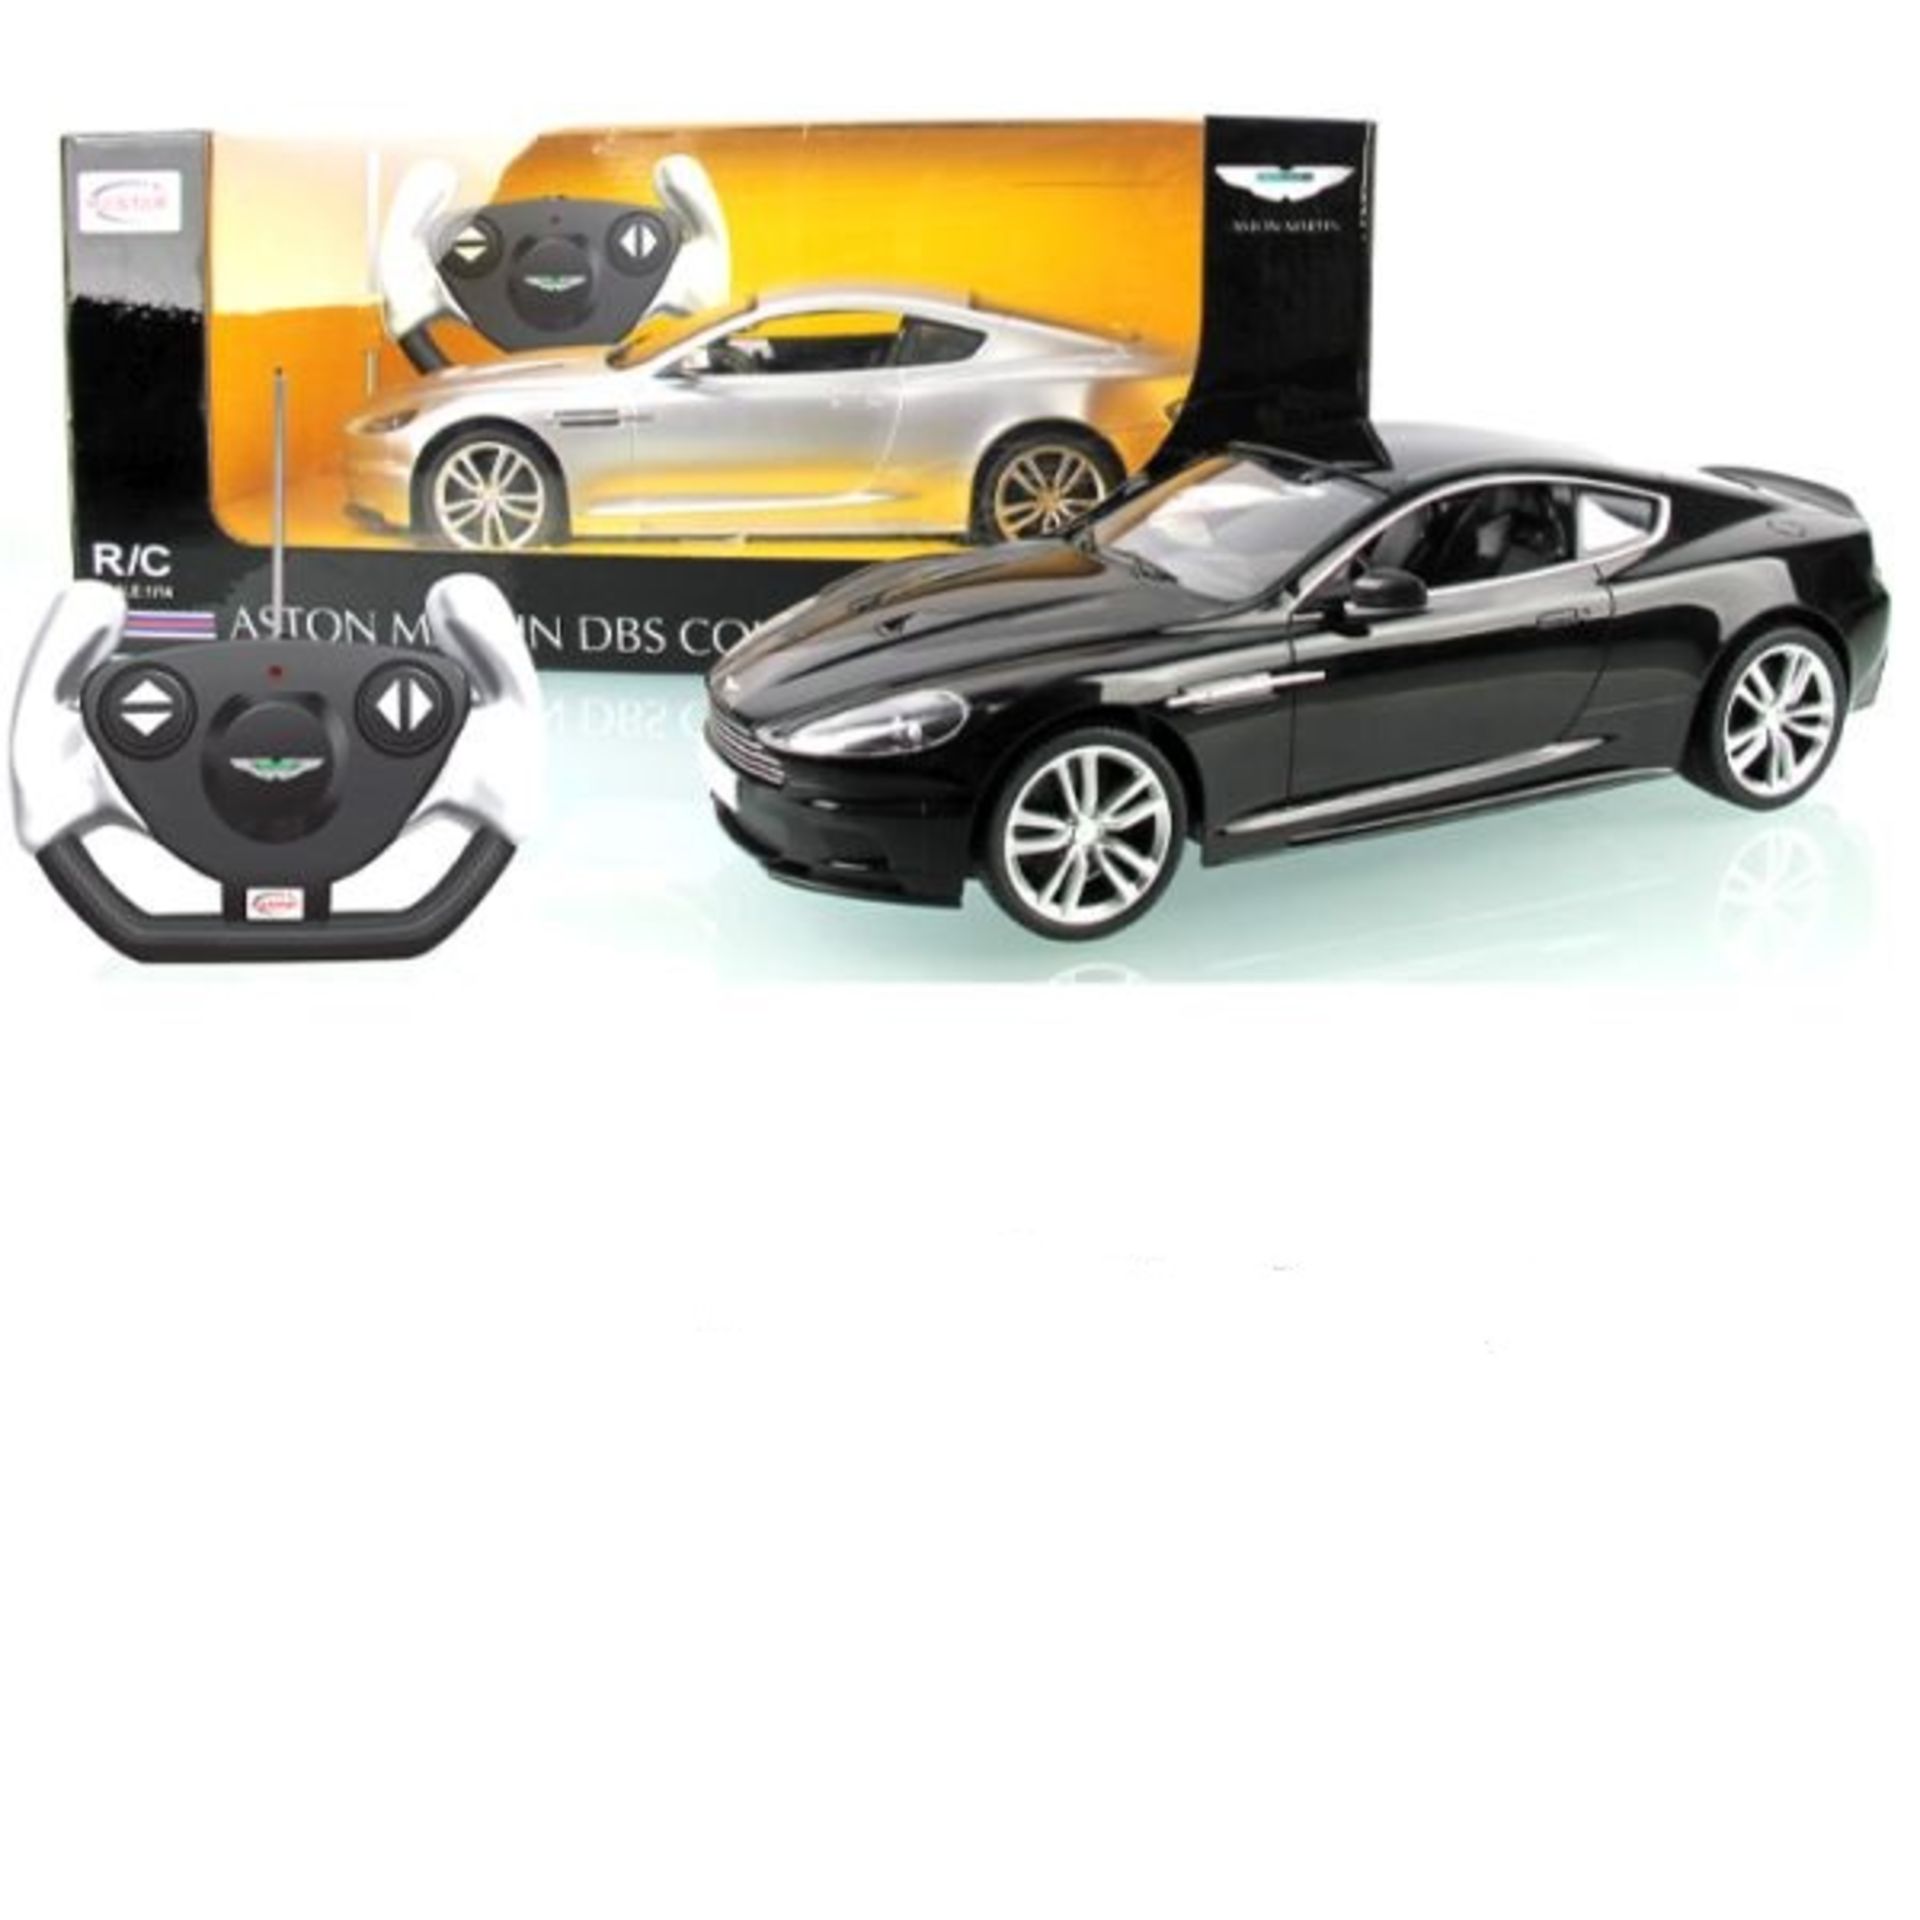 V Brand New 1:14 Scale Aston Martin DBS Coupe